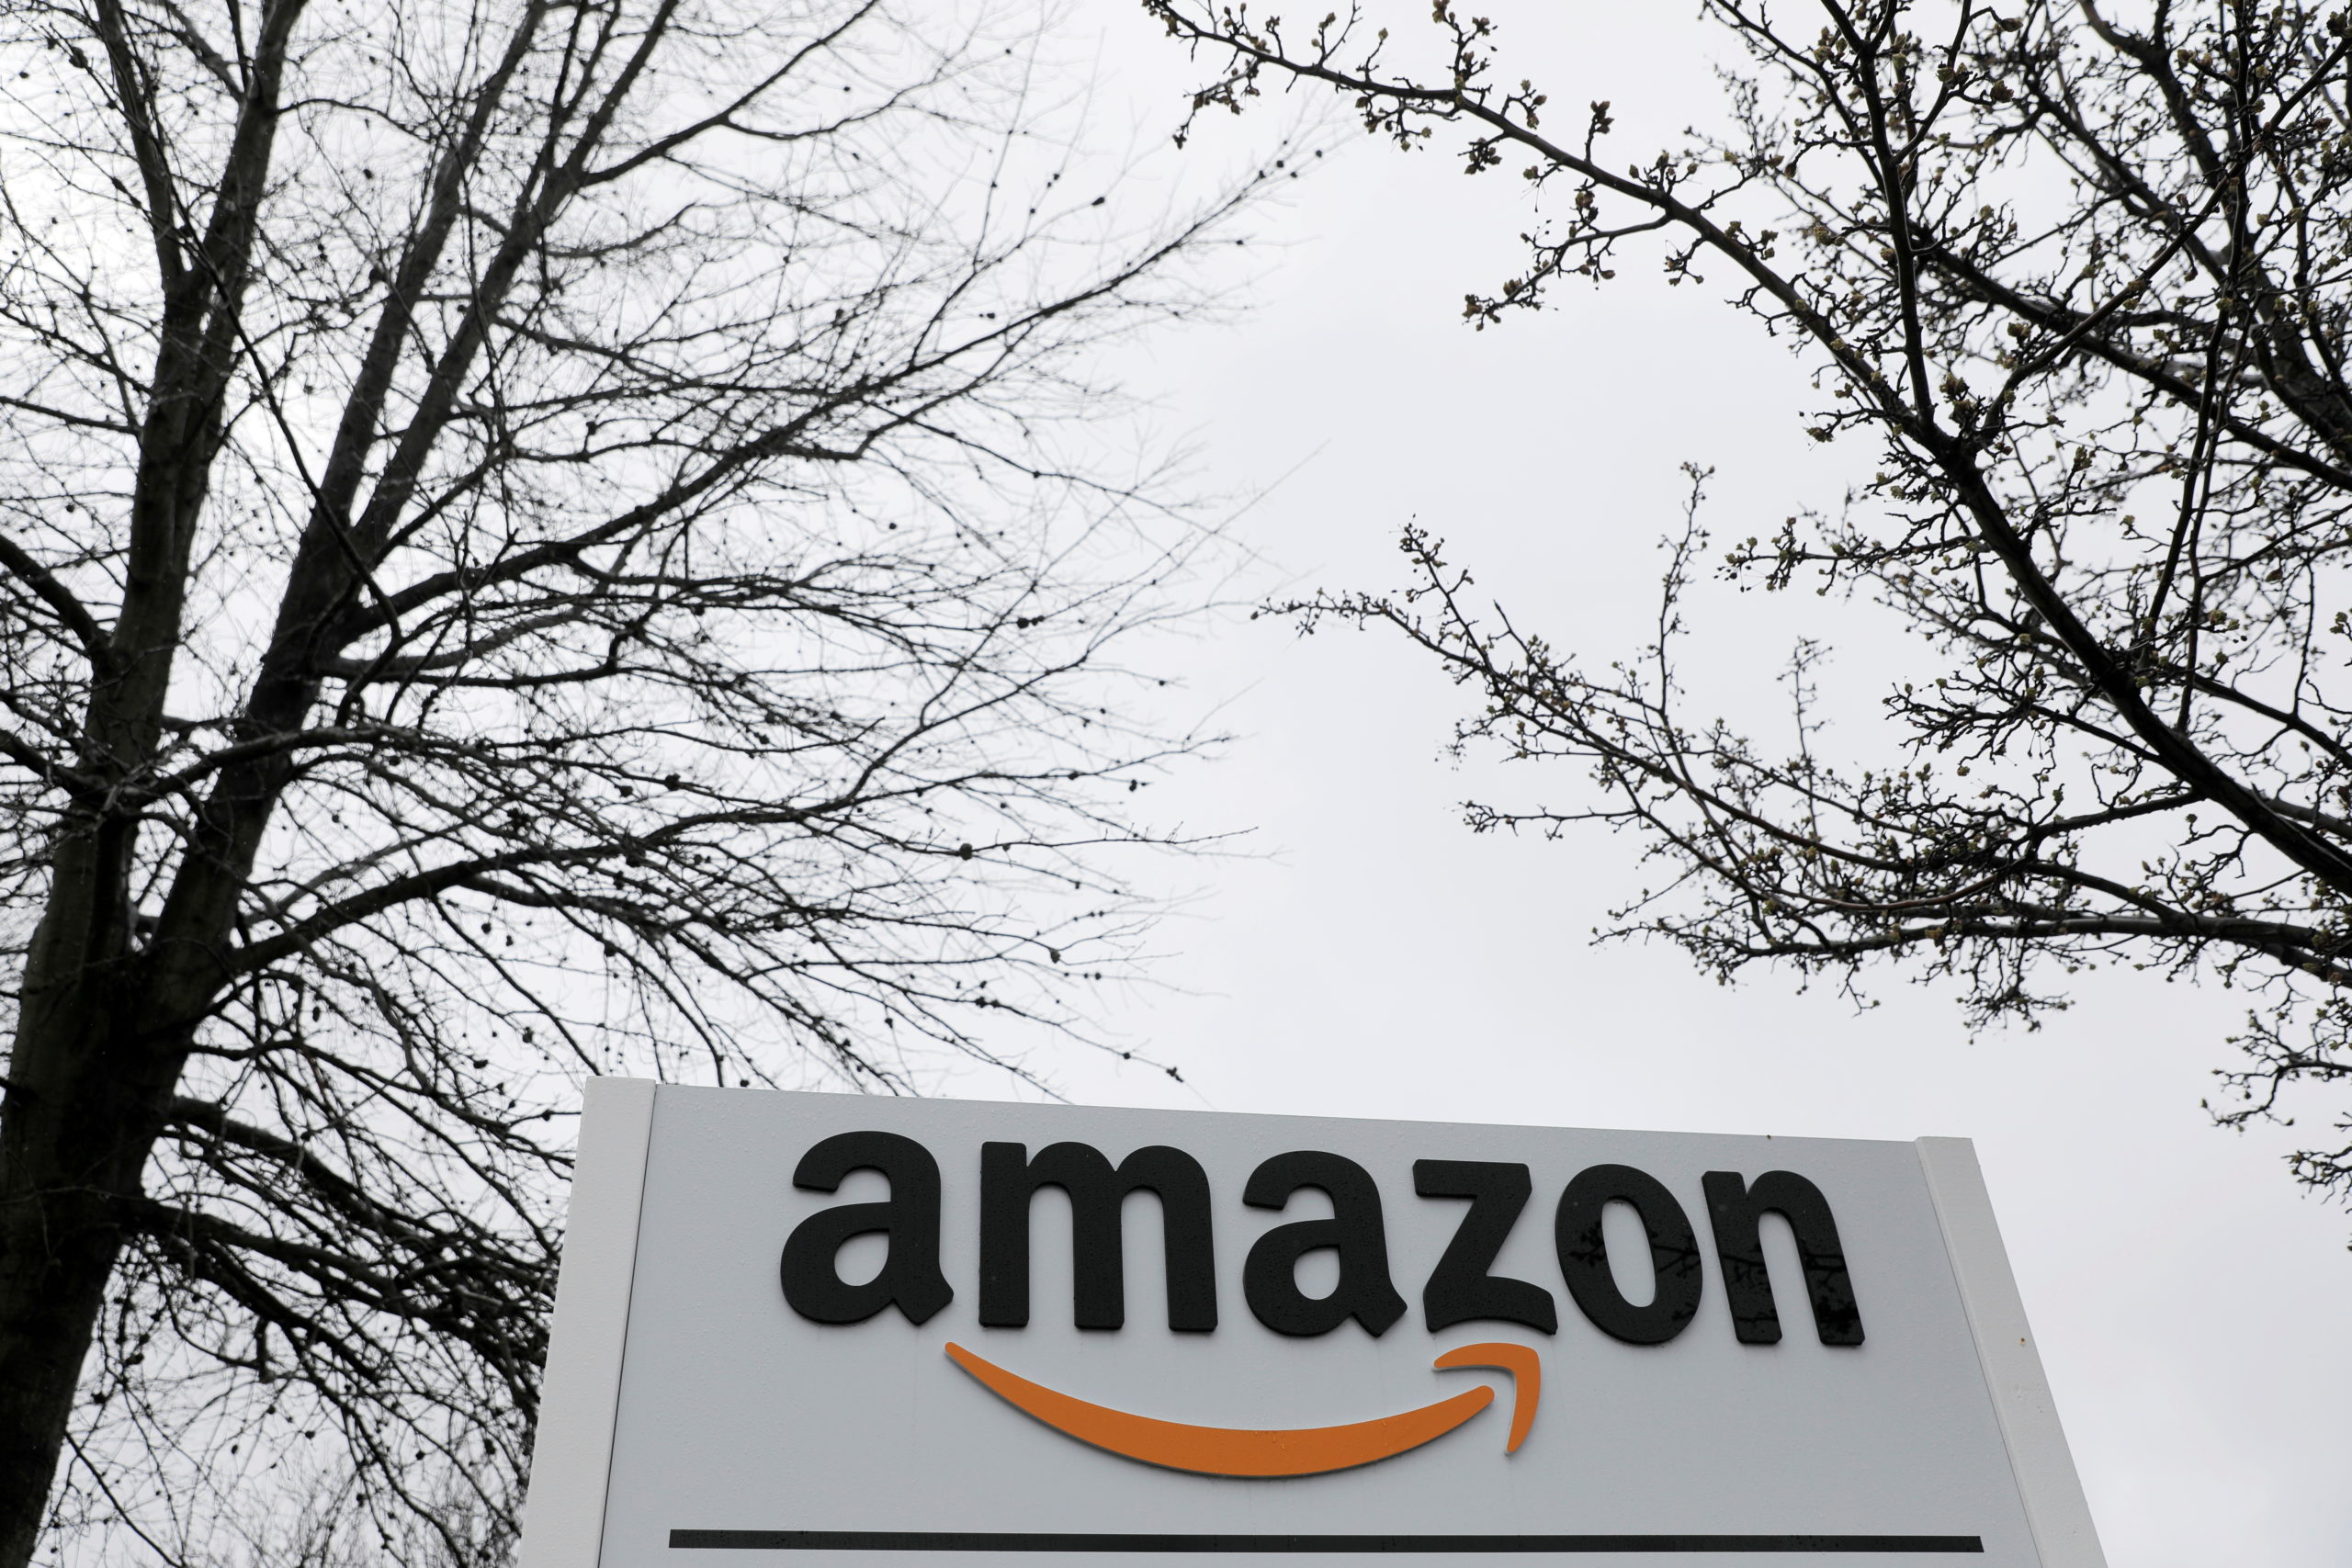 Amazon wins court fight against $303 million EU tax order, Engie loses